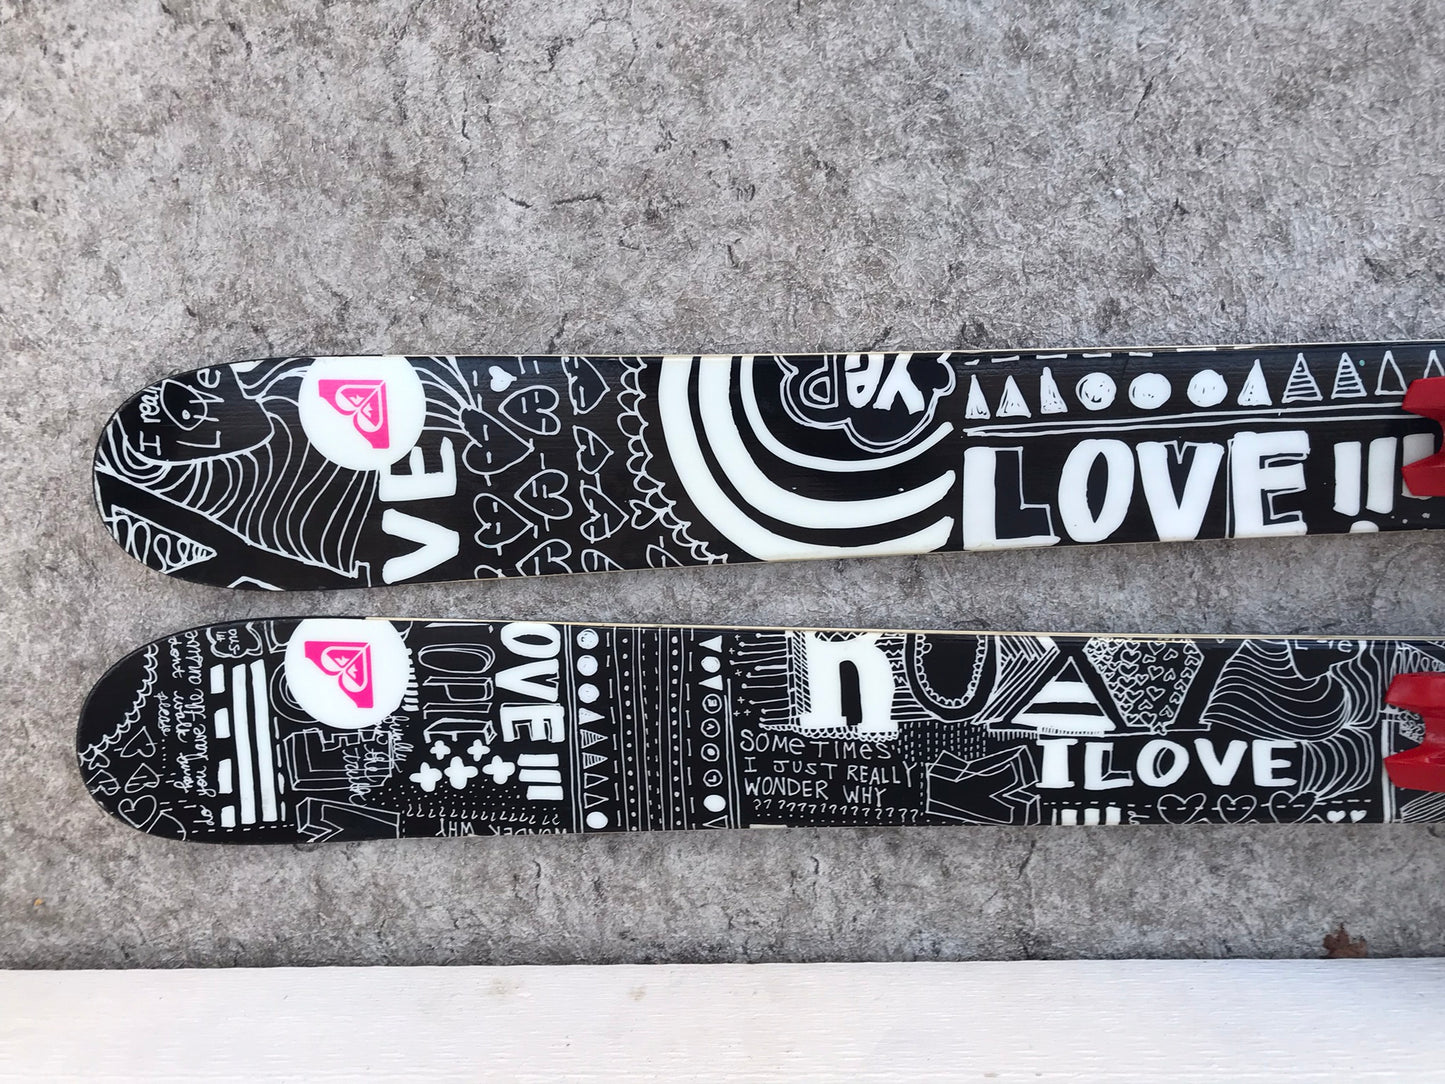 Ski 170 Roxy Luv Twin Tip Black White Pink  Parabolic with Bindings Excellent